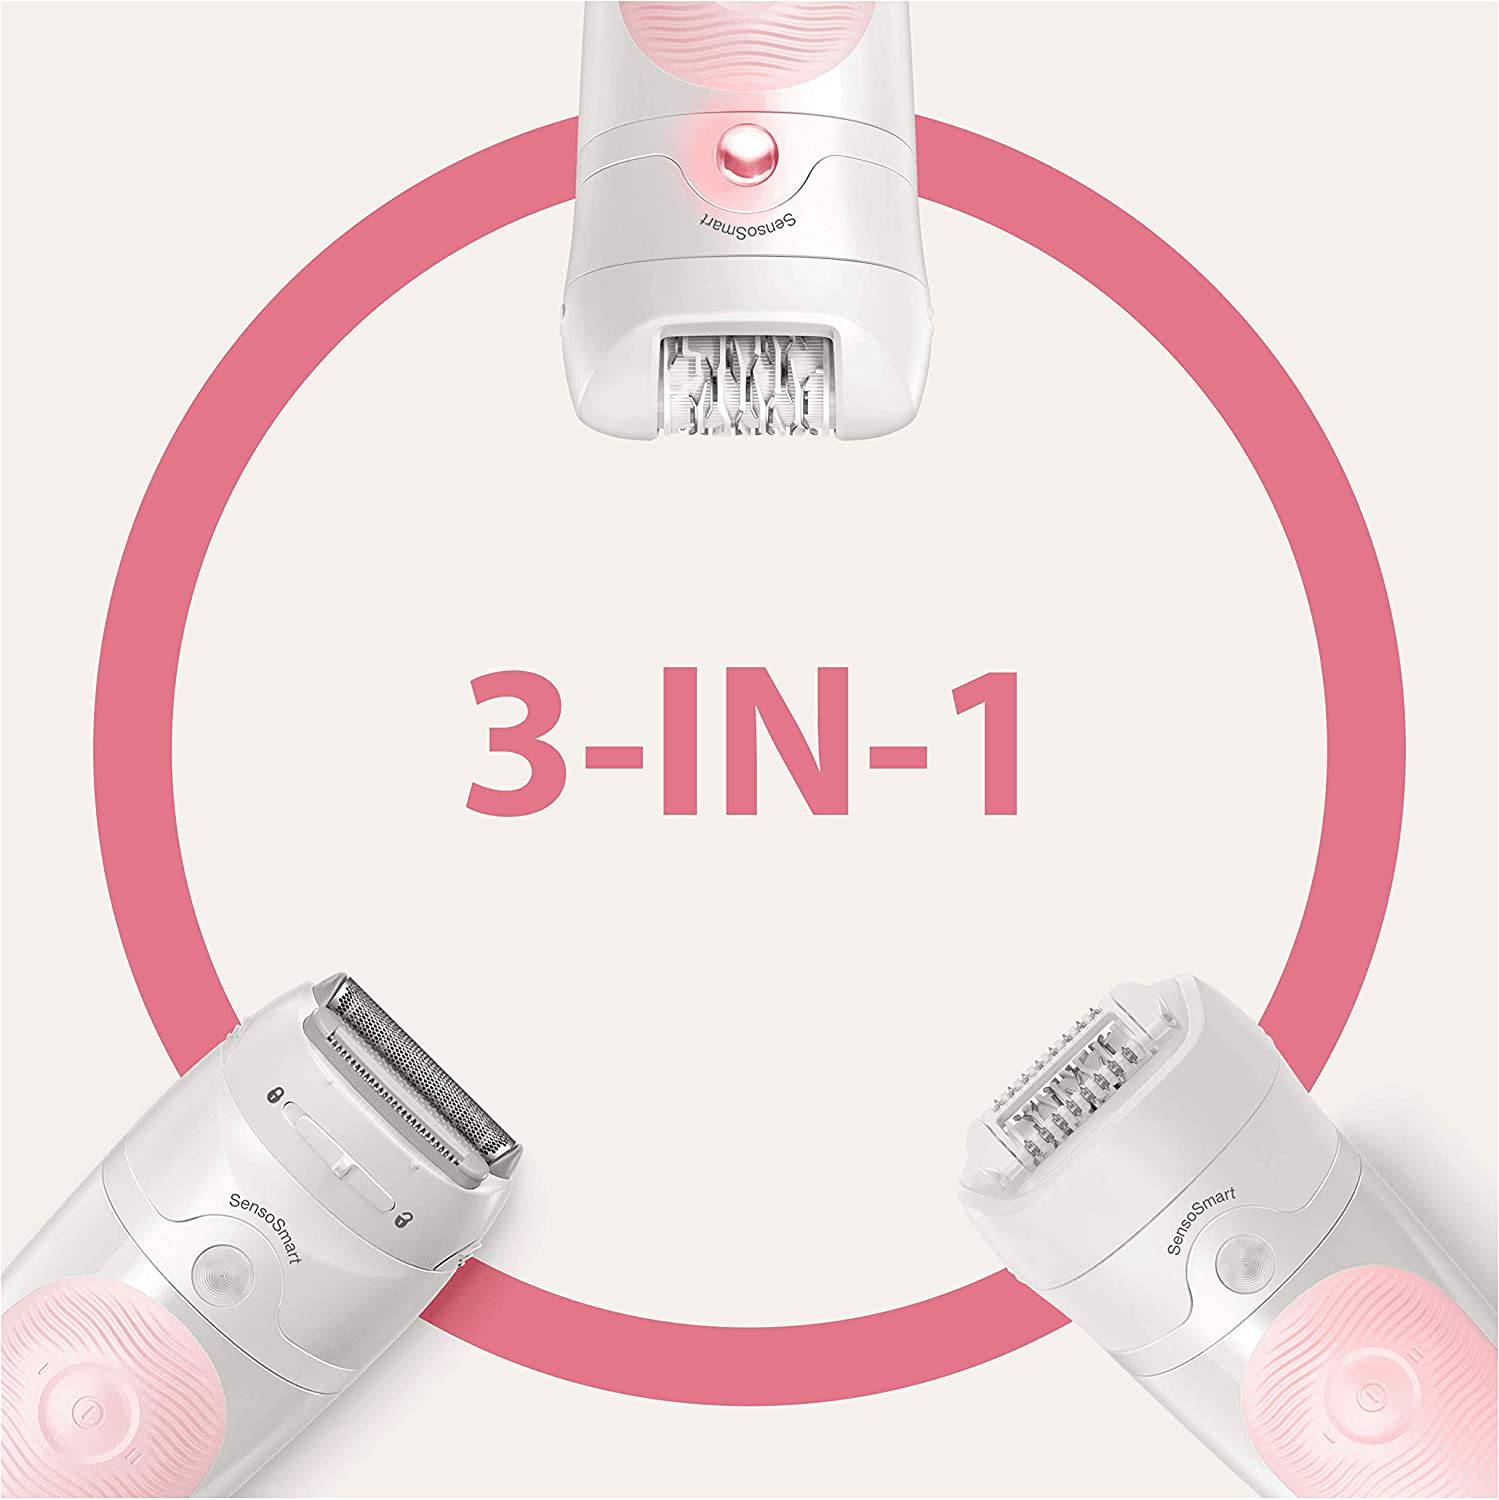 Braun Silk-épil 5 5-620, Epilator for Women, Includes Shaver and Trimmer Head for Gentle Hair Removal - Healthxpress.ie